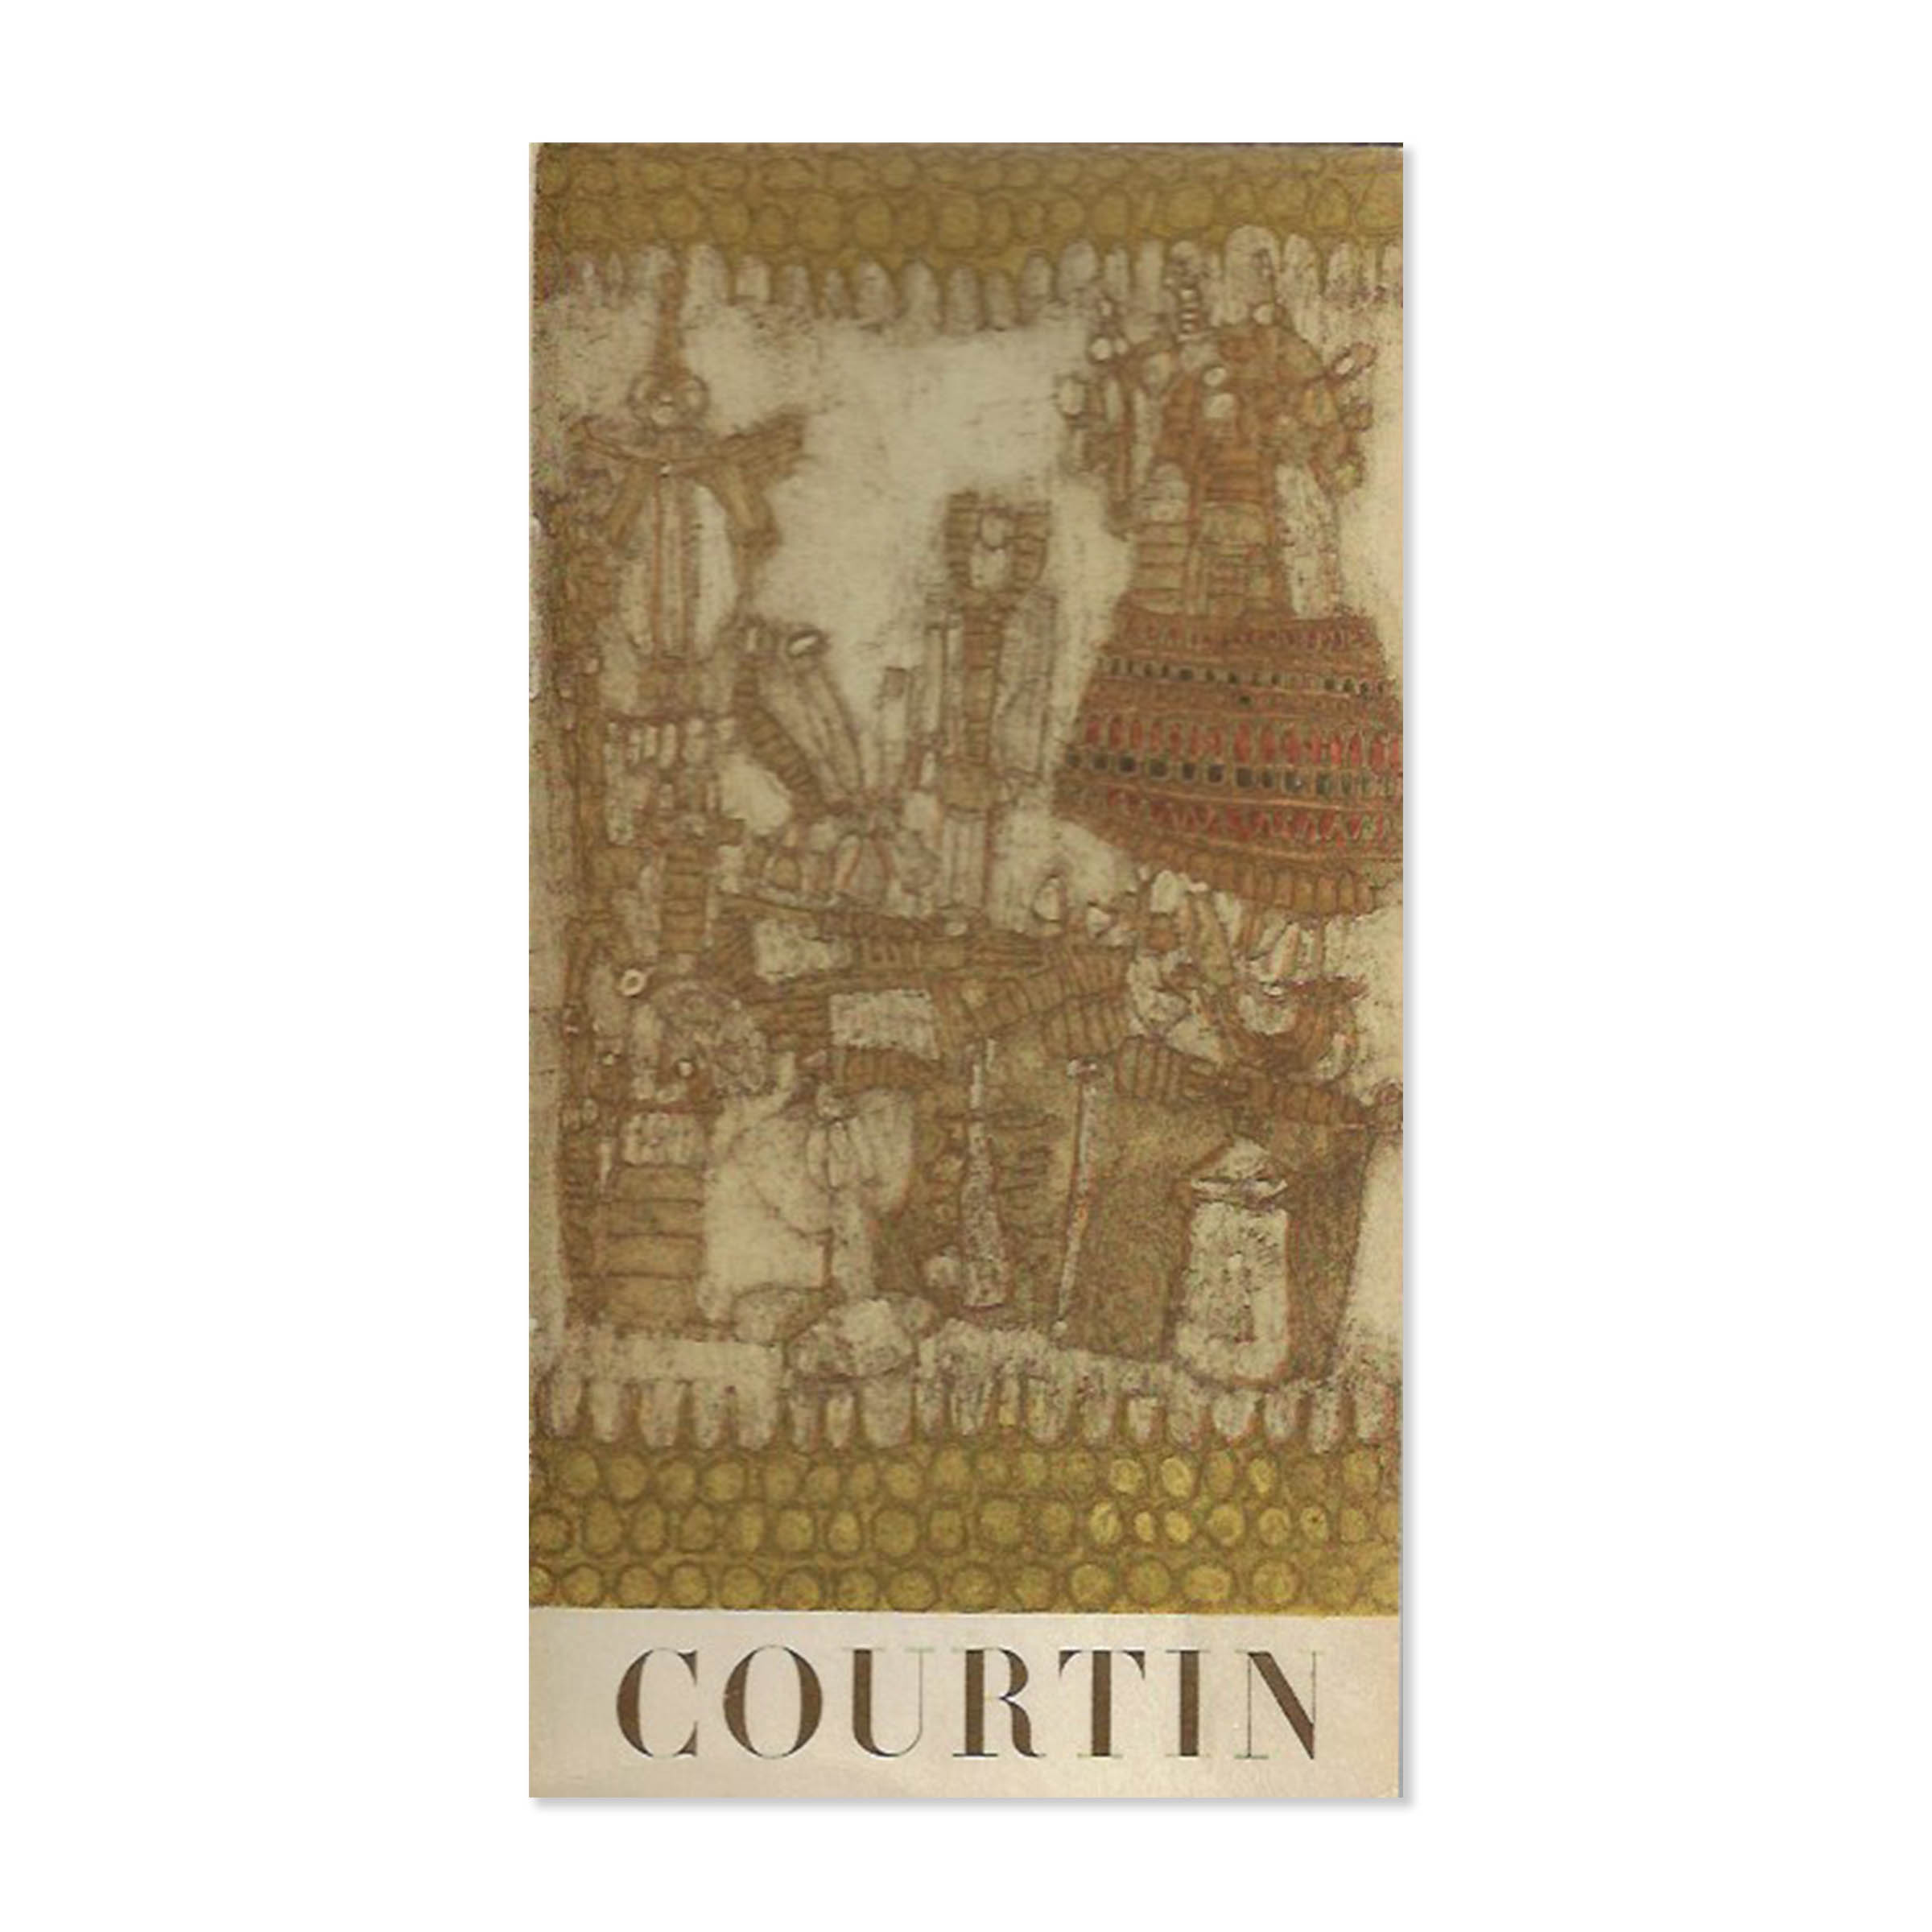 Courtin. Cover view